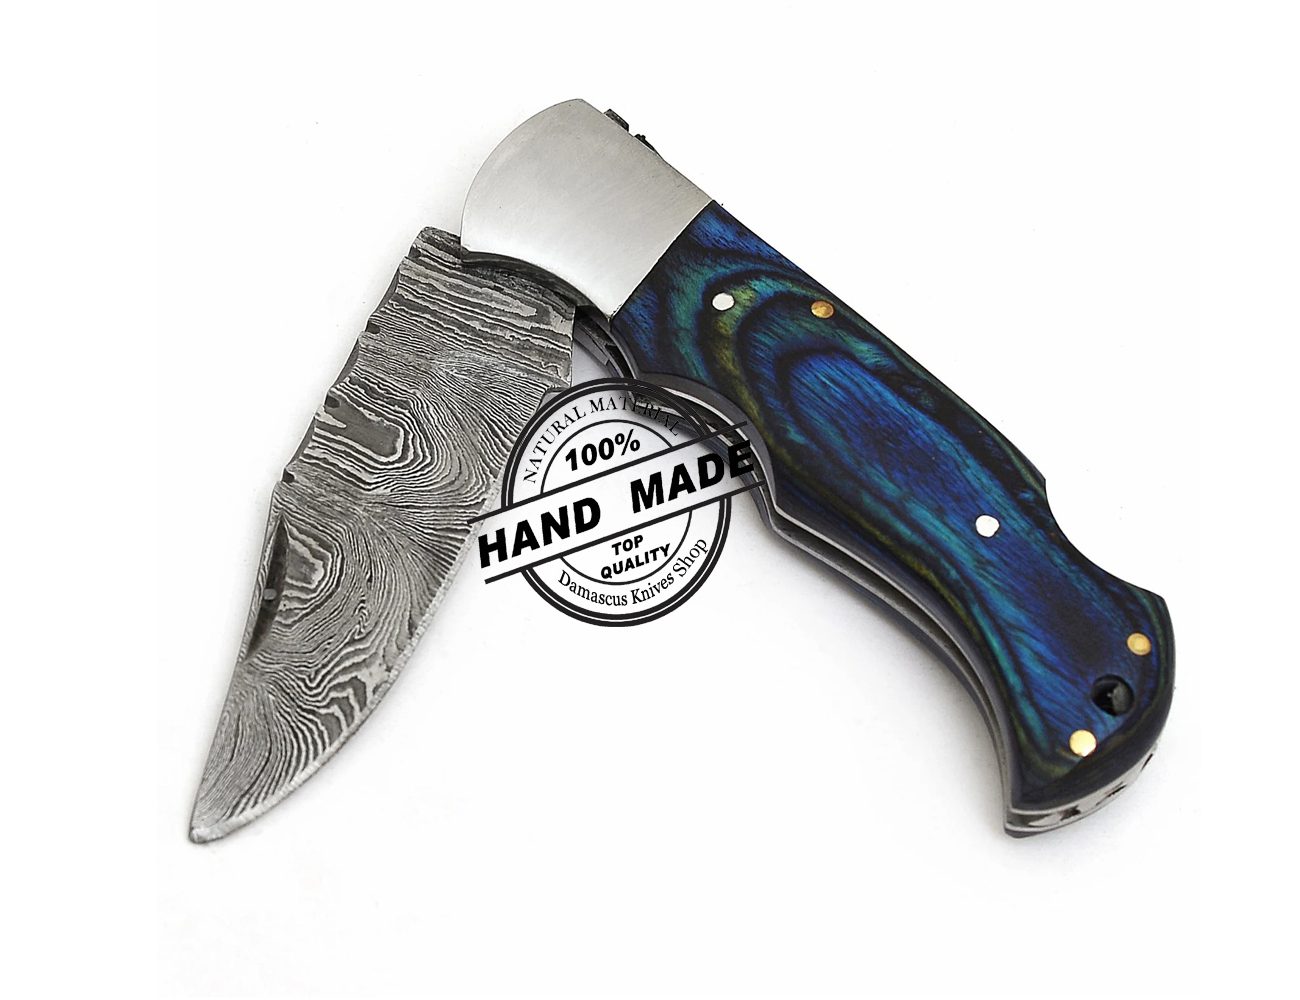 Crafted Custom Damascus Steel Pocket Knife Gift Set with Gift Box - Home Wet Bar